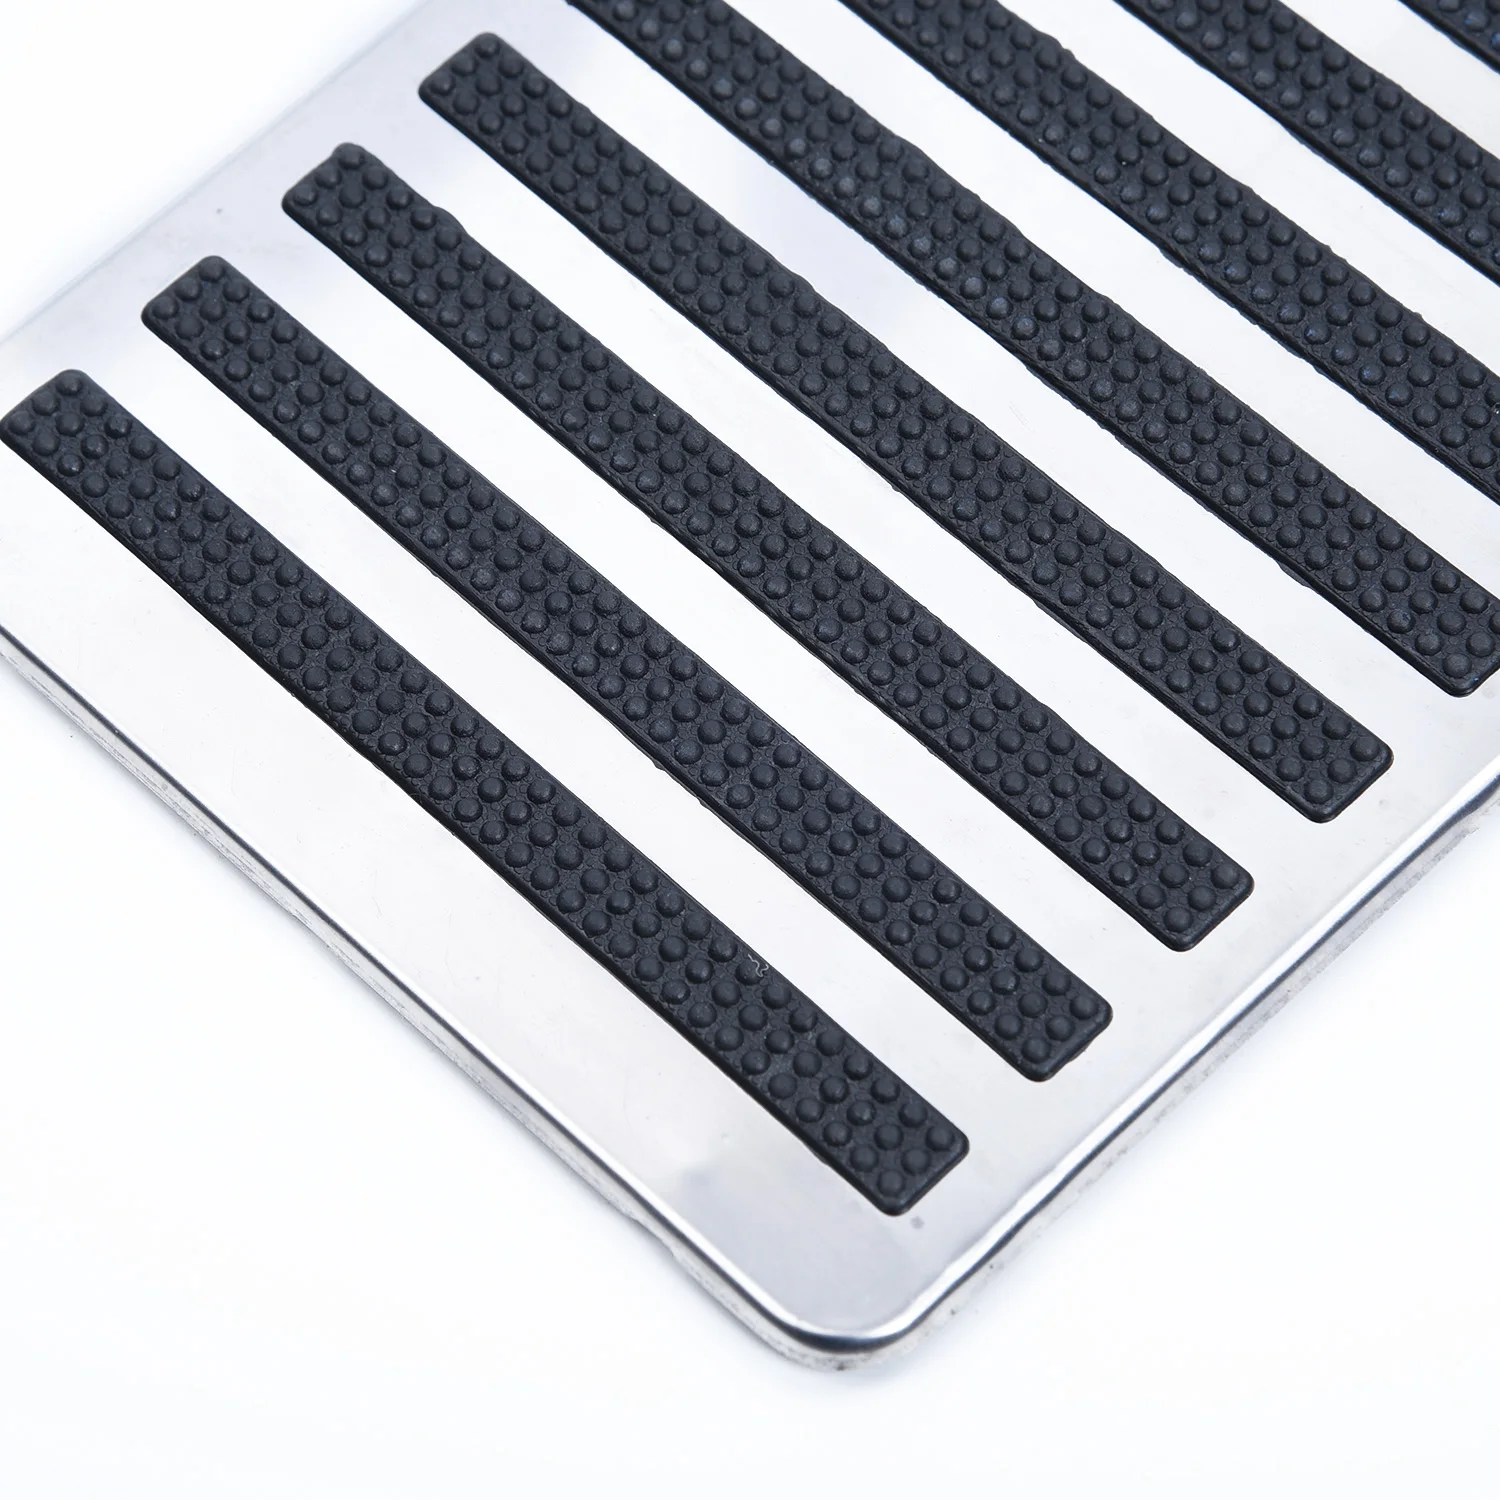 

Interior Mat Patch Foot Pedal Pad Non-slip 23.5X16cm Stainless Steel Carpet Waterproof Universal Driver Car Side Auto Plate